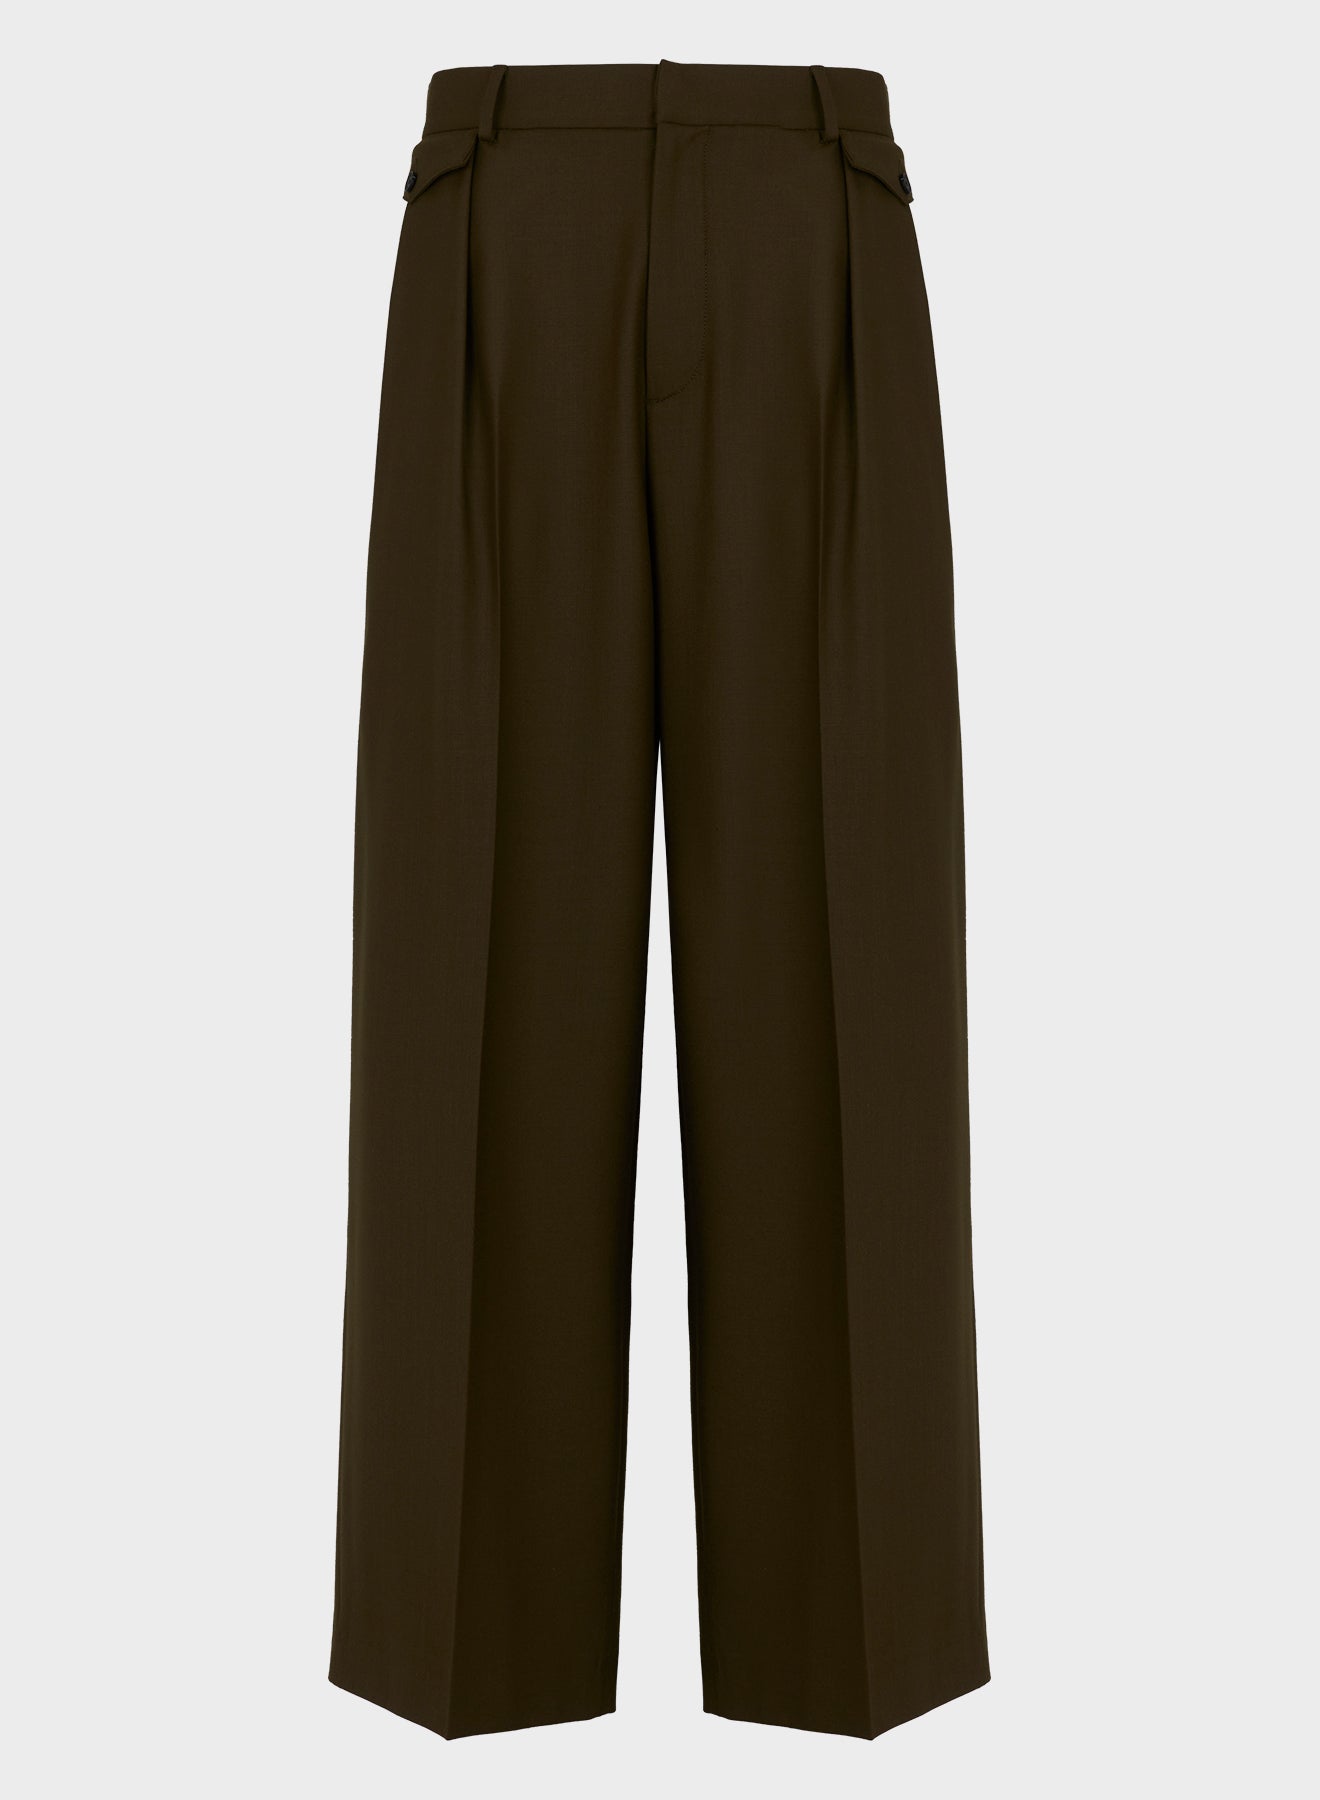 WIDE-LEG PANTS WITH FLAPS